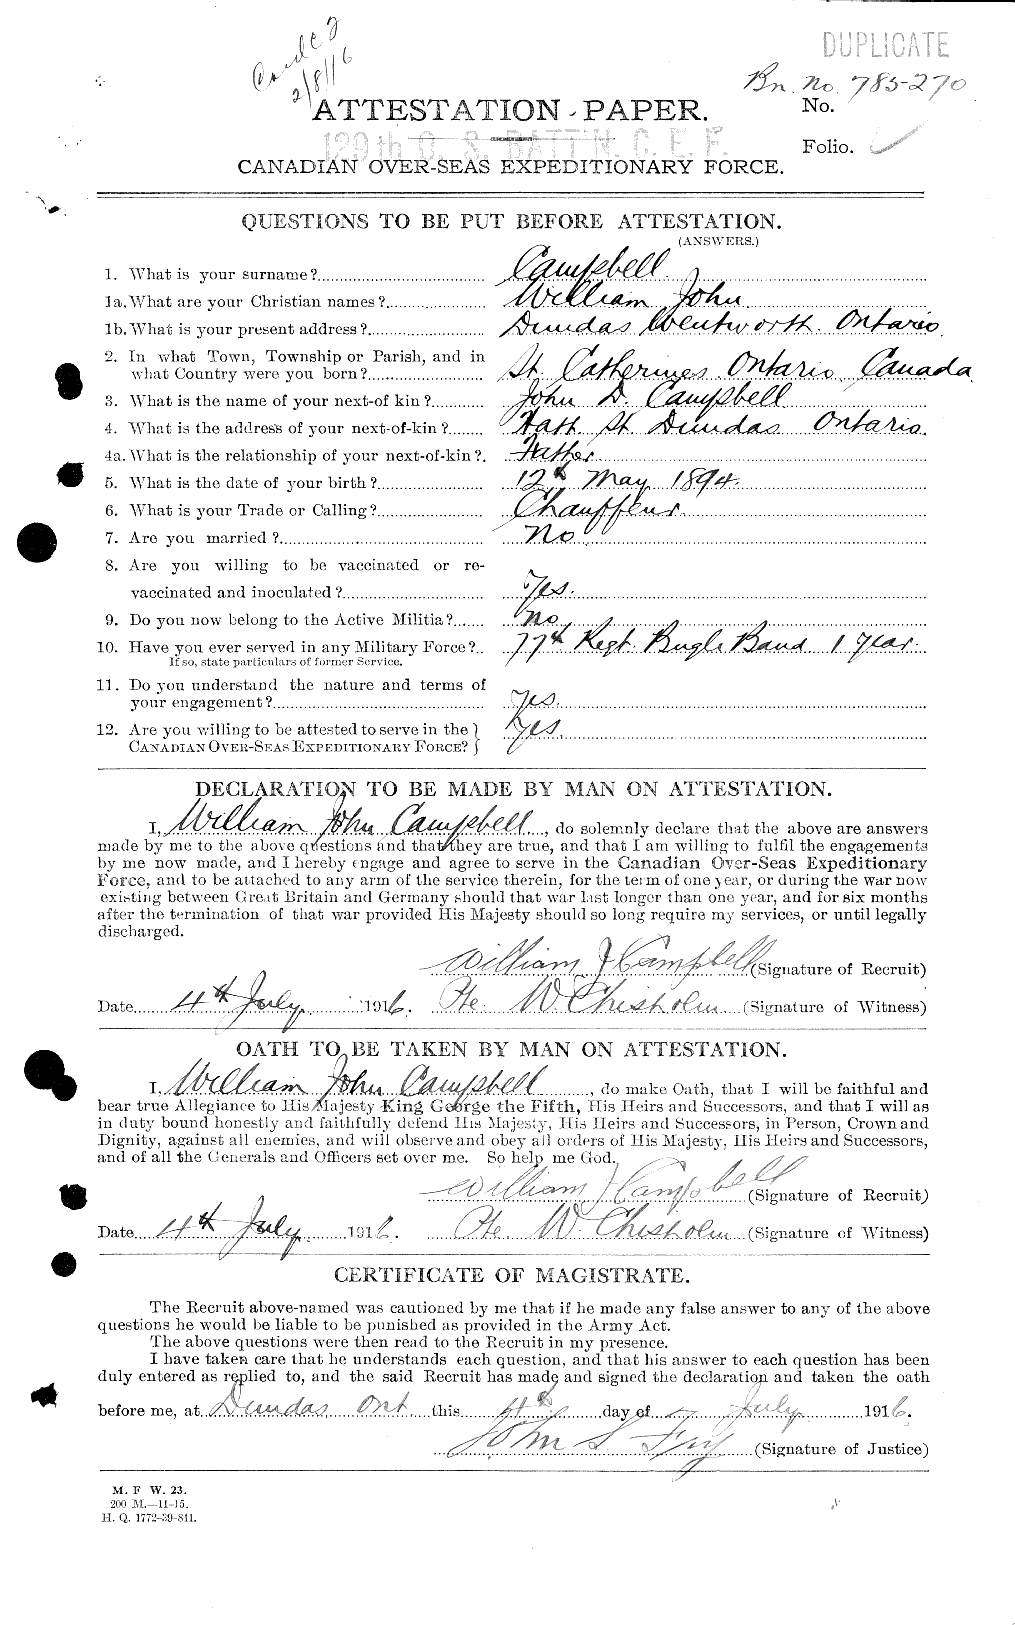 Personnel Records of the First World War - CEF 008703a